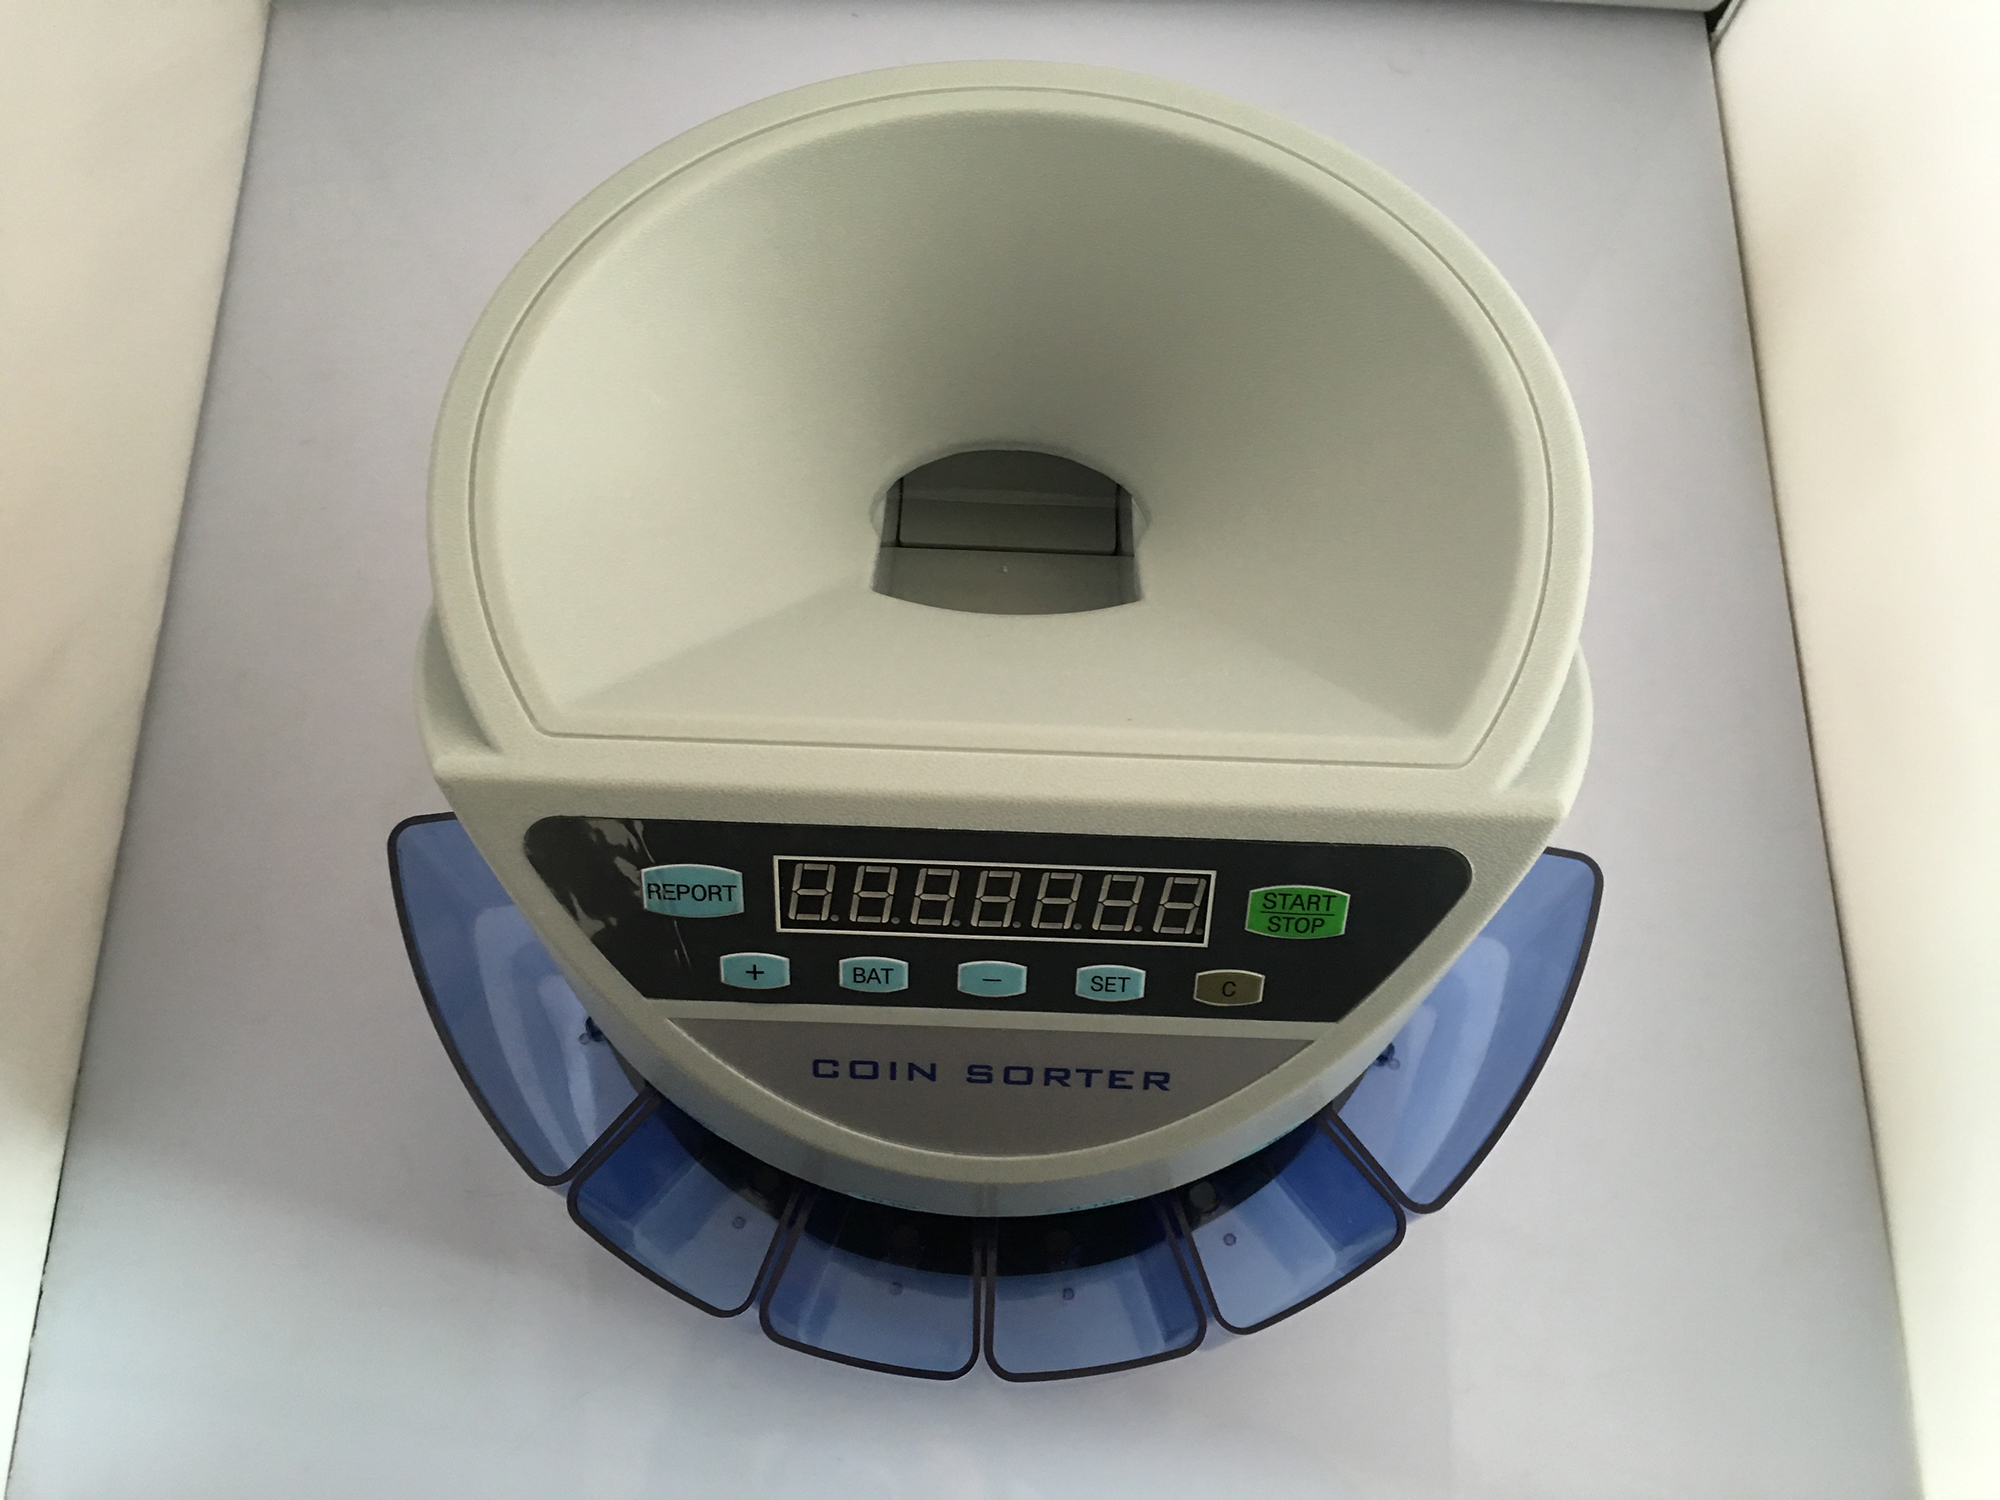 Electronic coin sorter SE-900 coin counting machine for most of countries